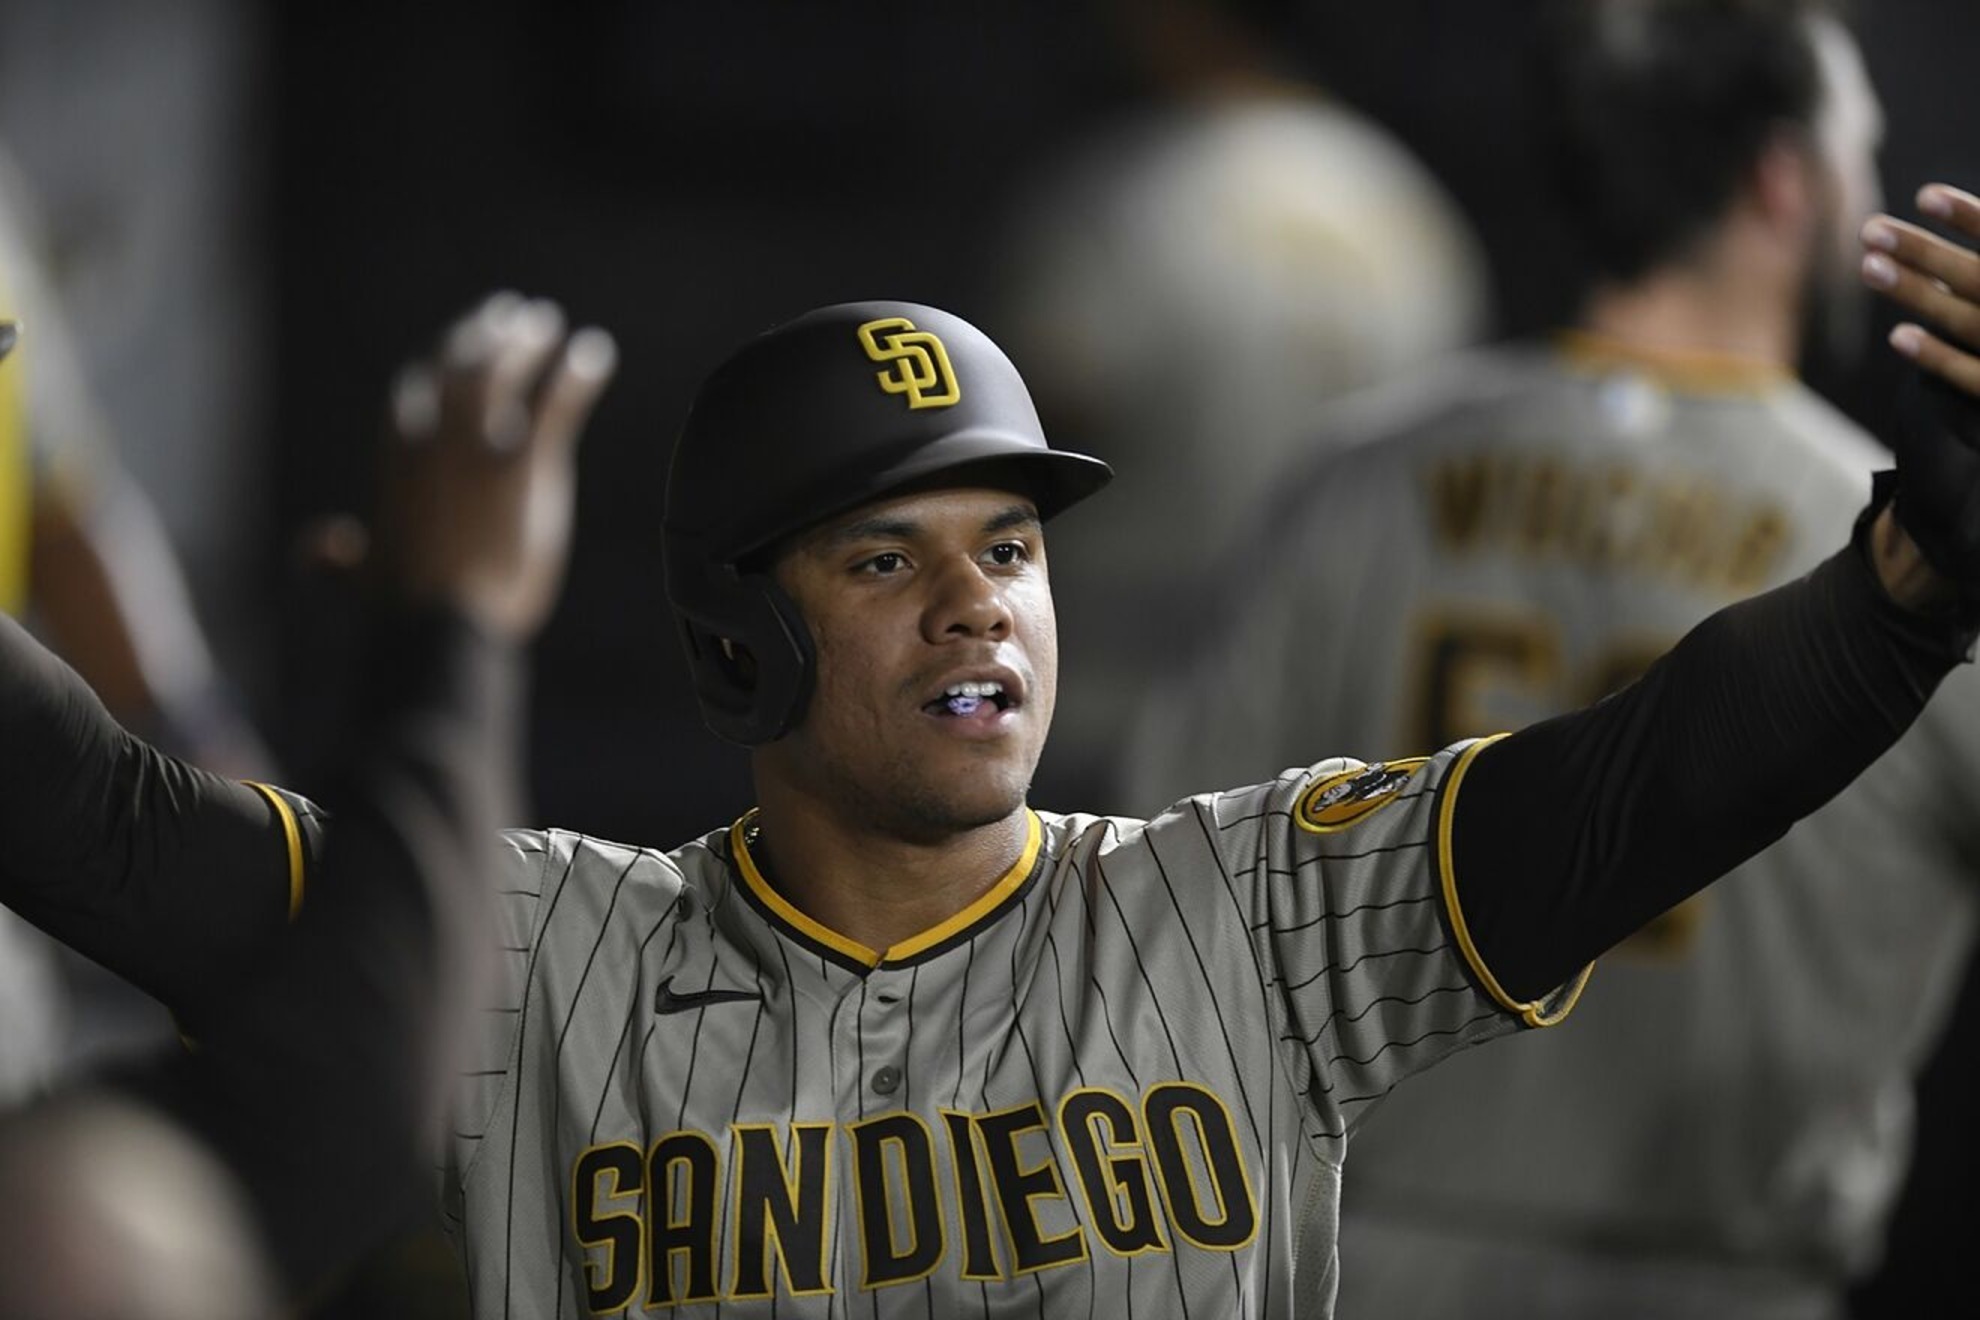 Juan Soto cemented his place as a major league star with the Padres